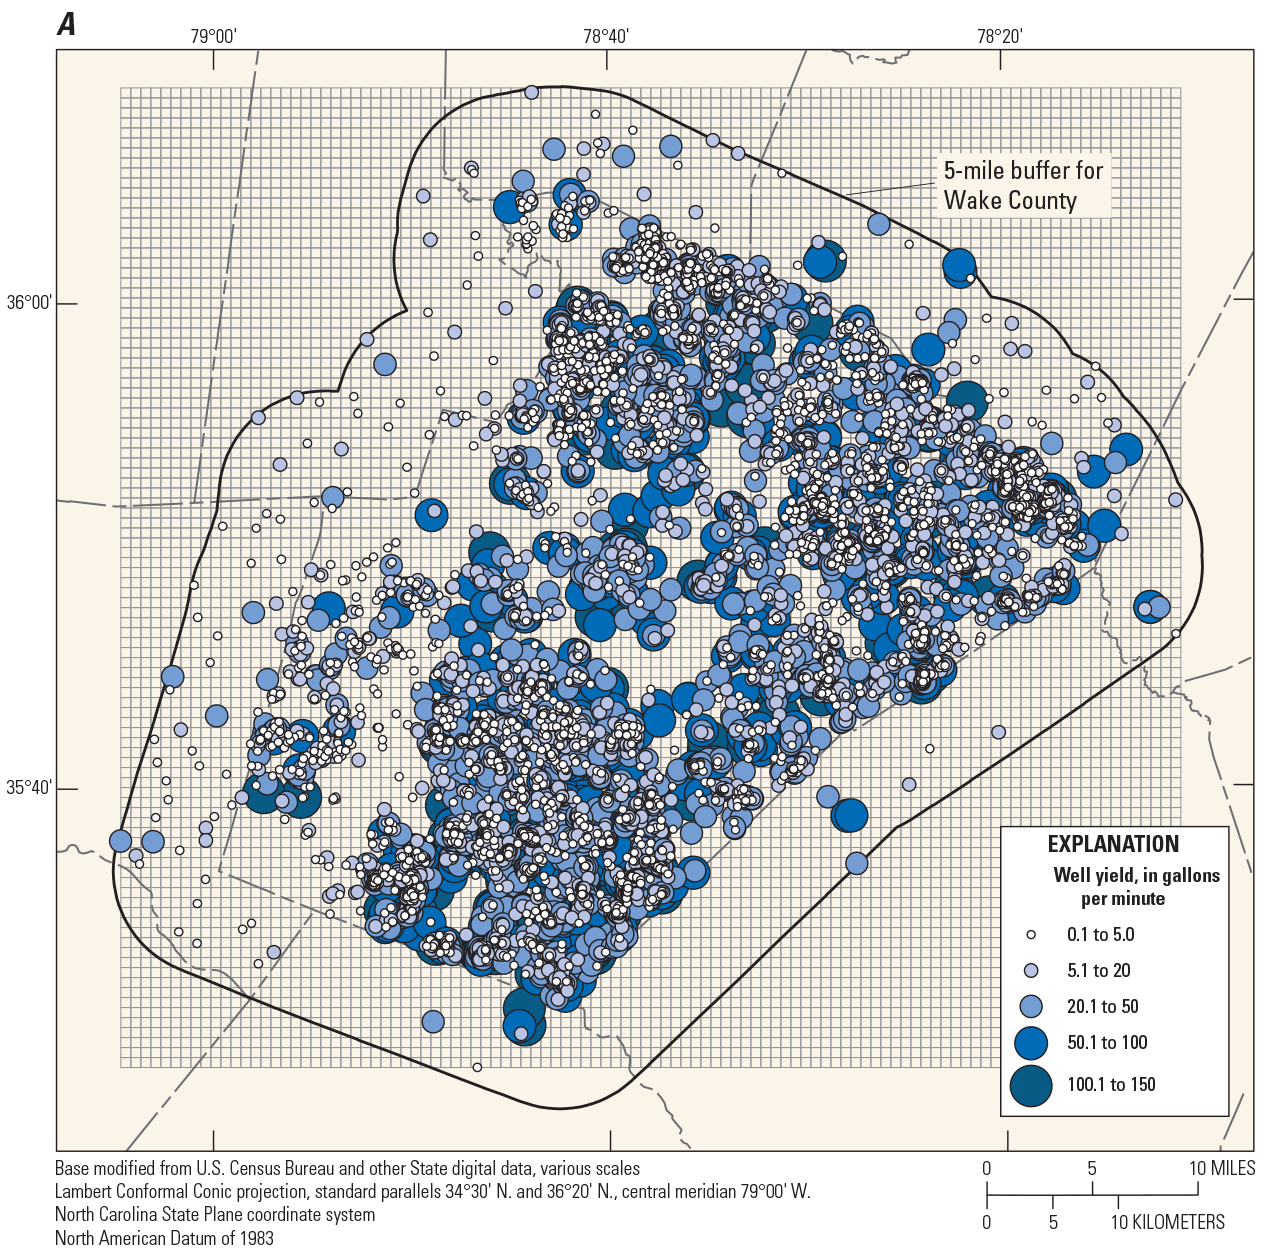 Grid used to reduce number of wells used to create well yield map of Wake County.